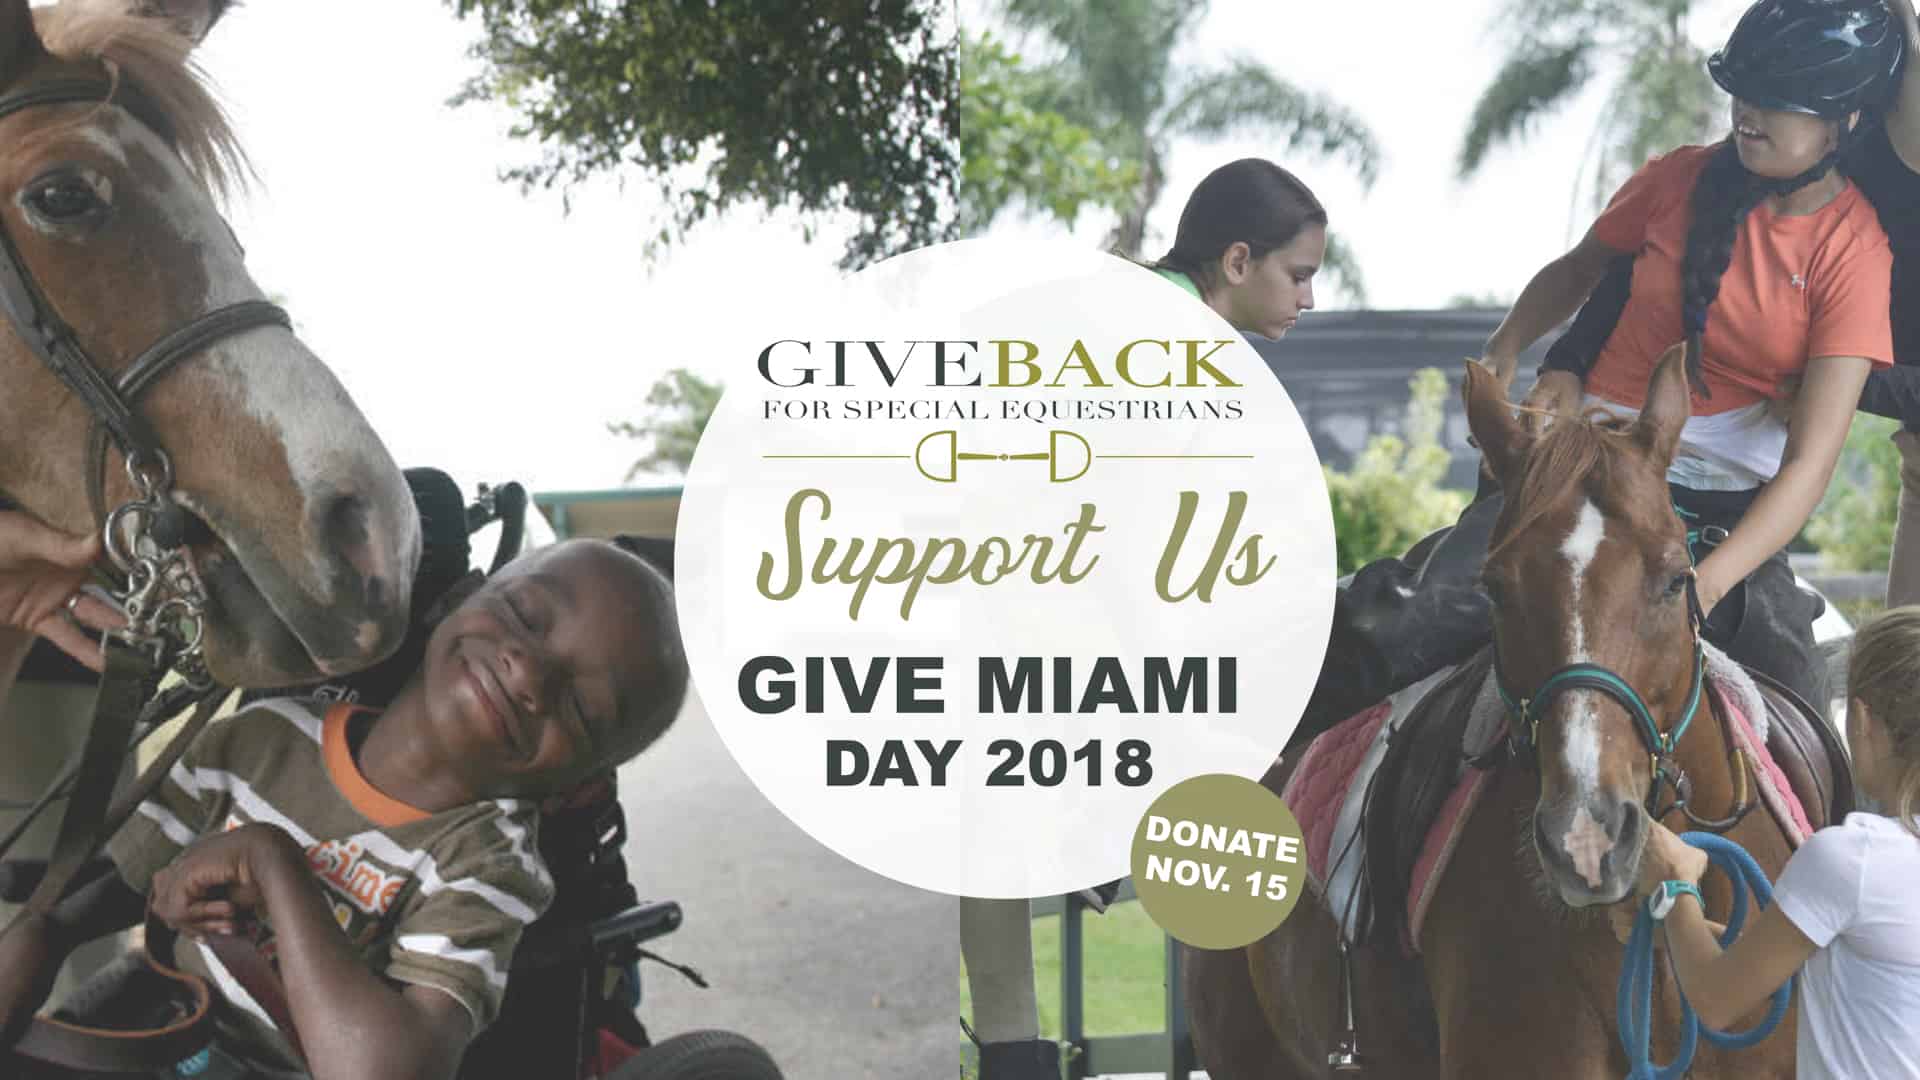 Support Our Official Charity for Give Miami Day